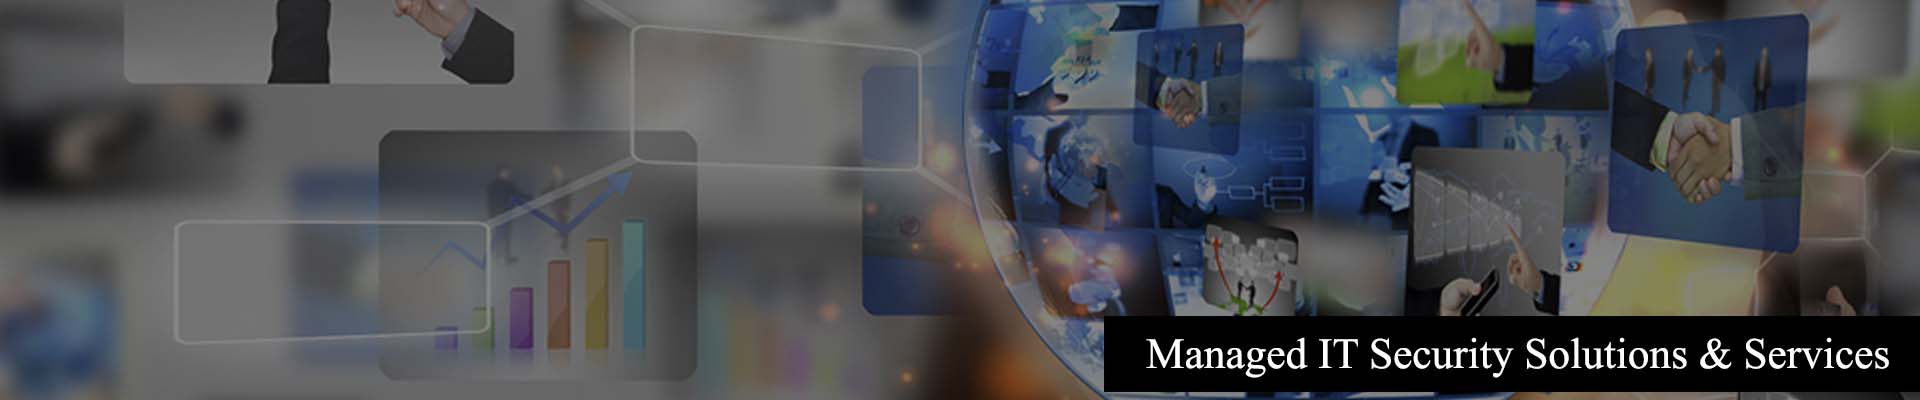 Managed IT Security Solutions Services banner - Codec Networks 